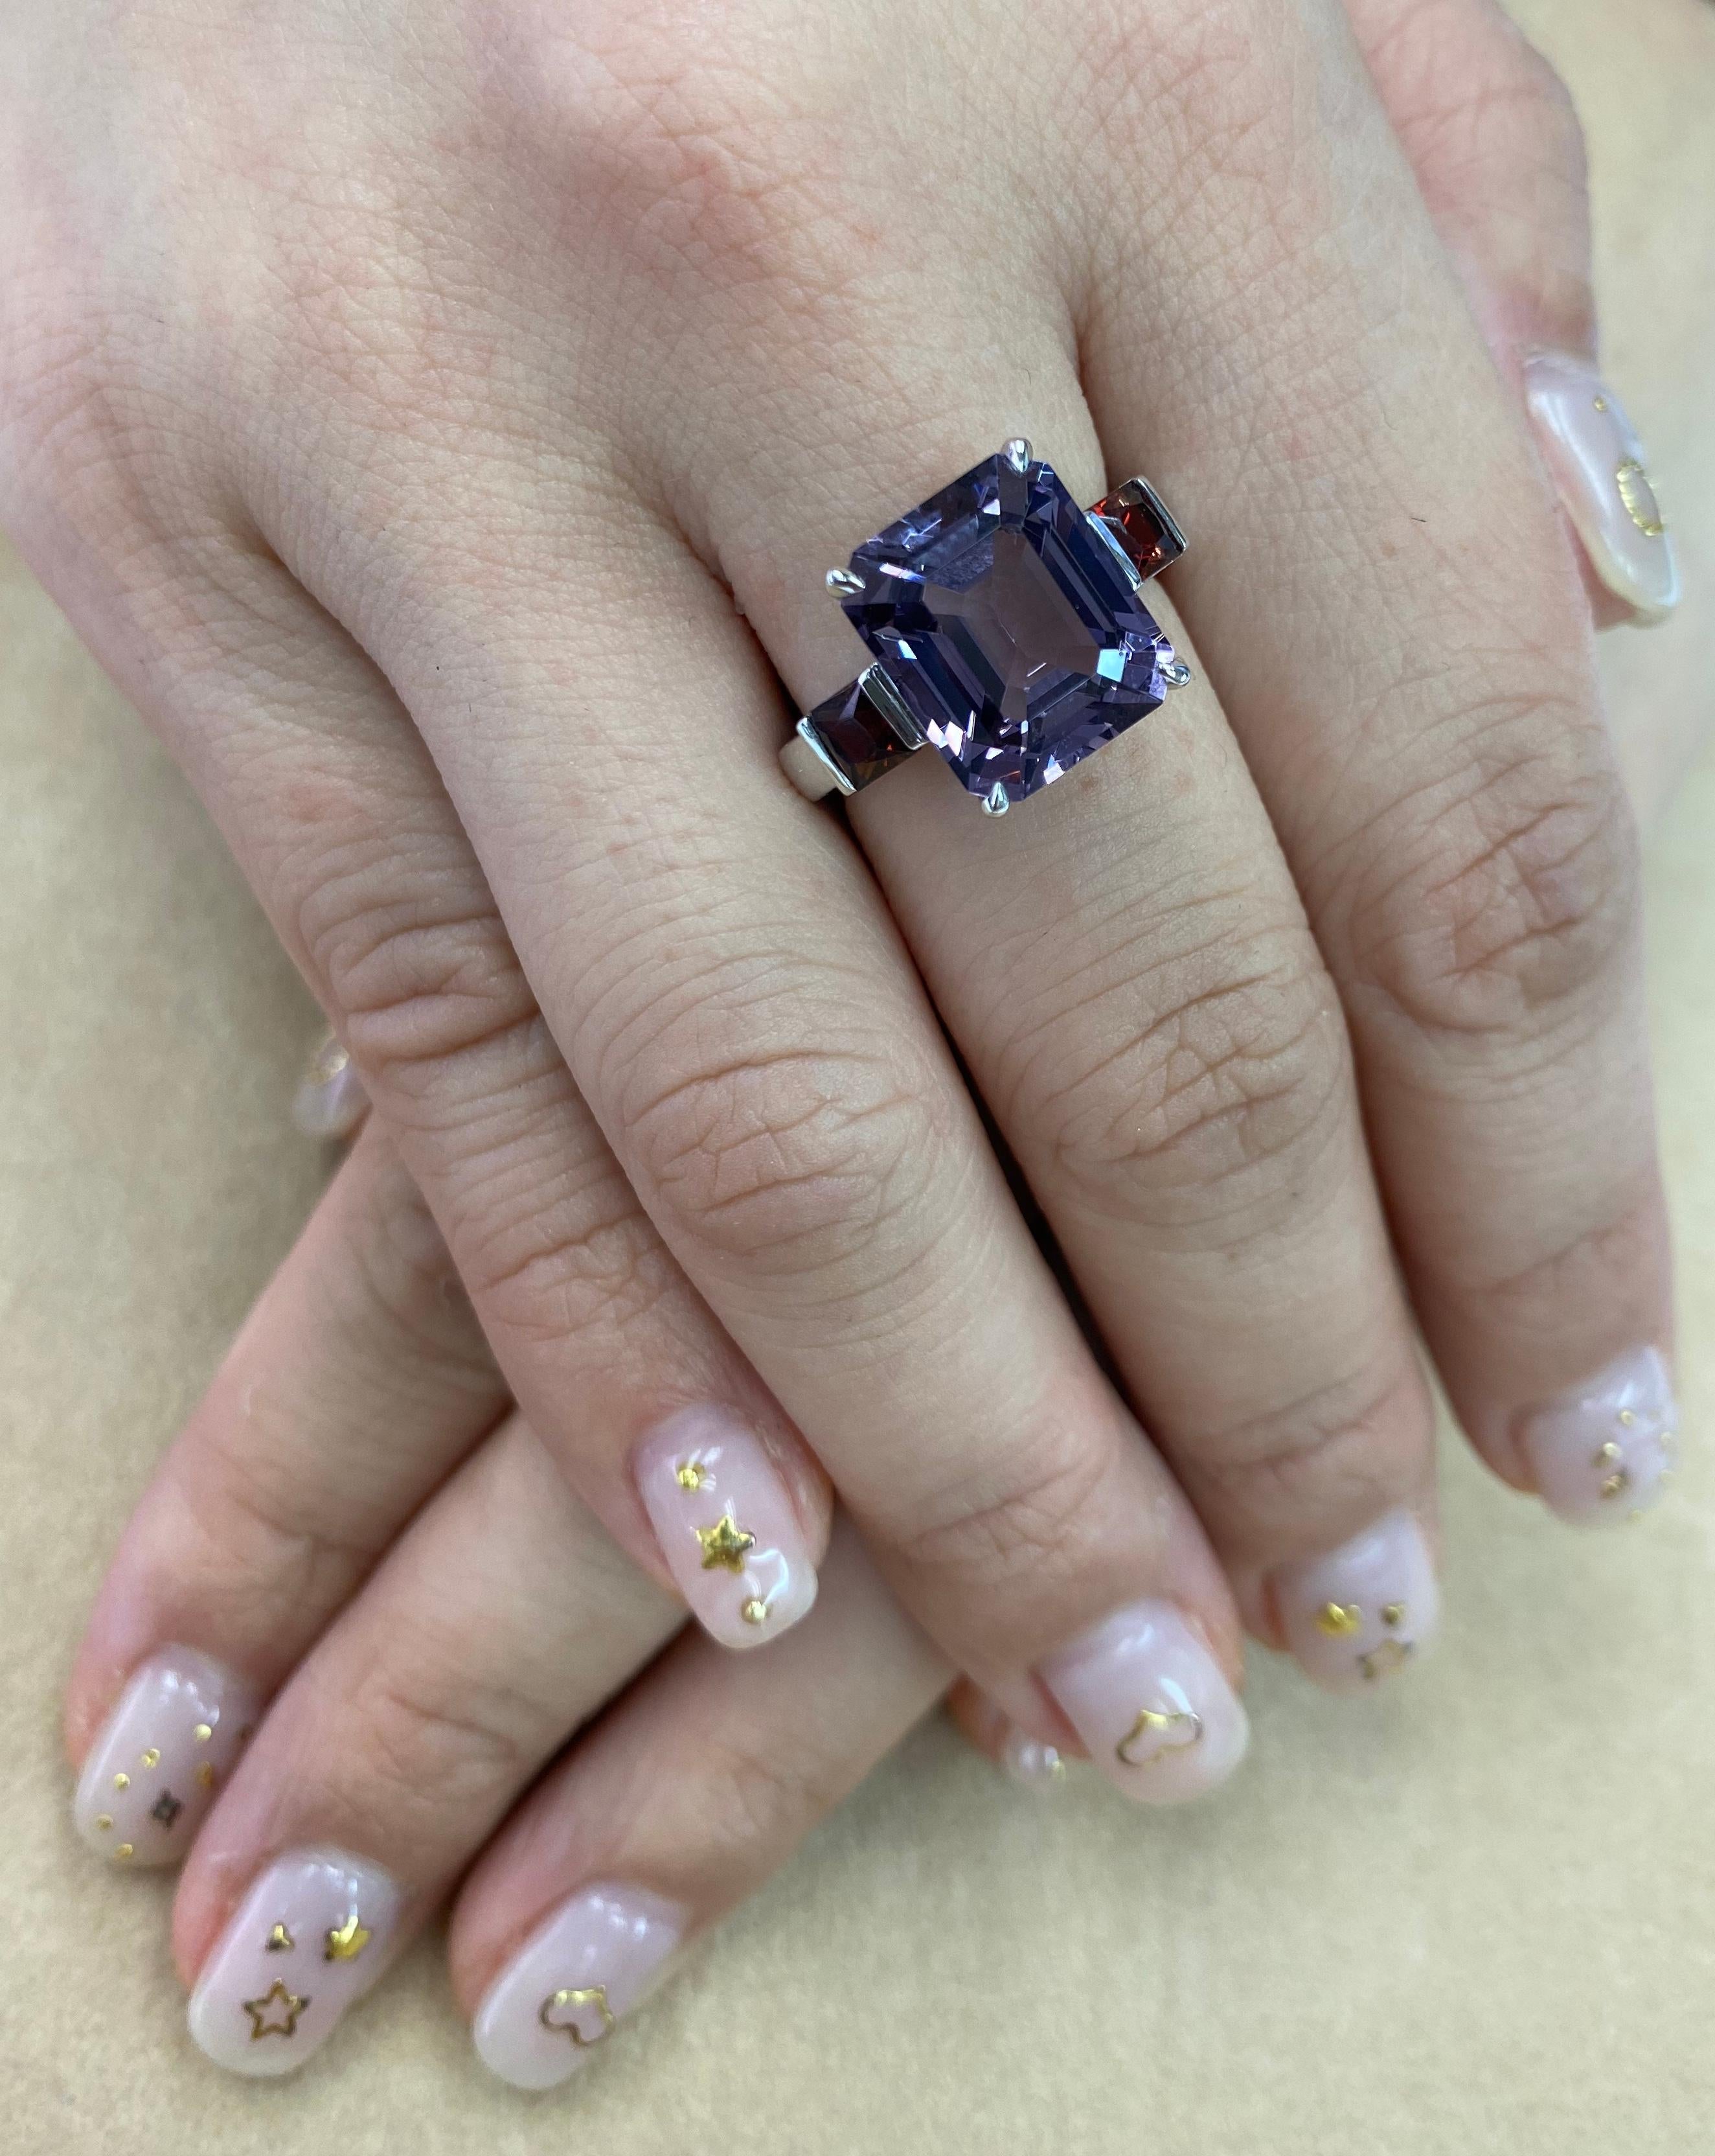 Here is a PURE Spinel 3 stone cocktail ring. The ring is set in 18k white gold. The center step cut purple pastel spinel is 7.77 cts. The Natural Spinel is well cut. The color is crispy and almost loupe clean. On each sides of the center spinel are